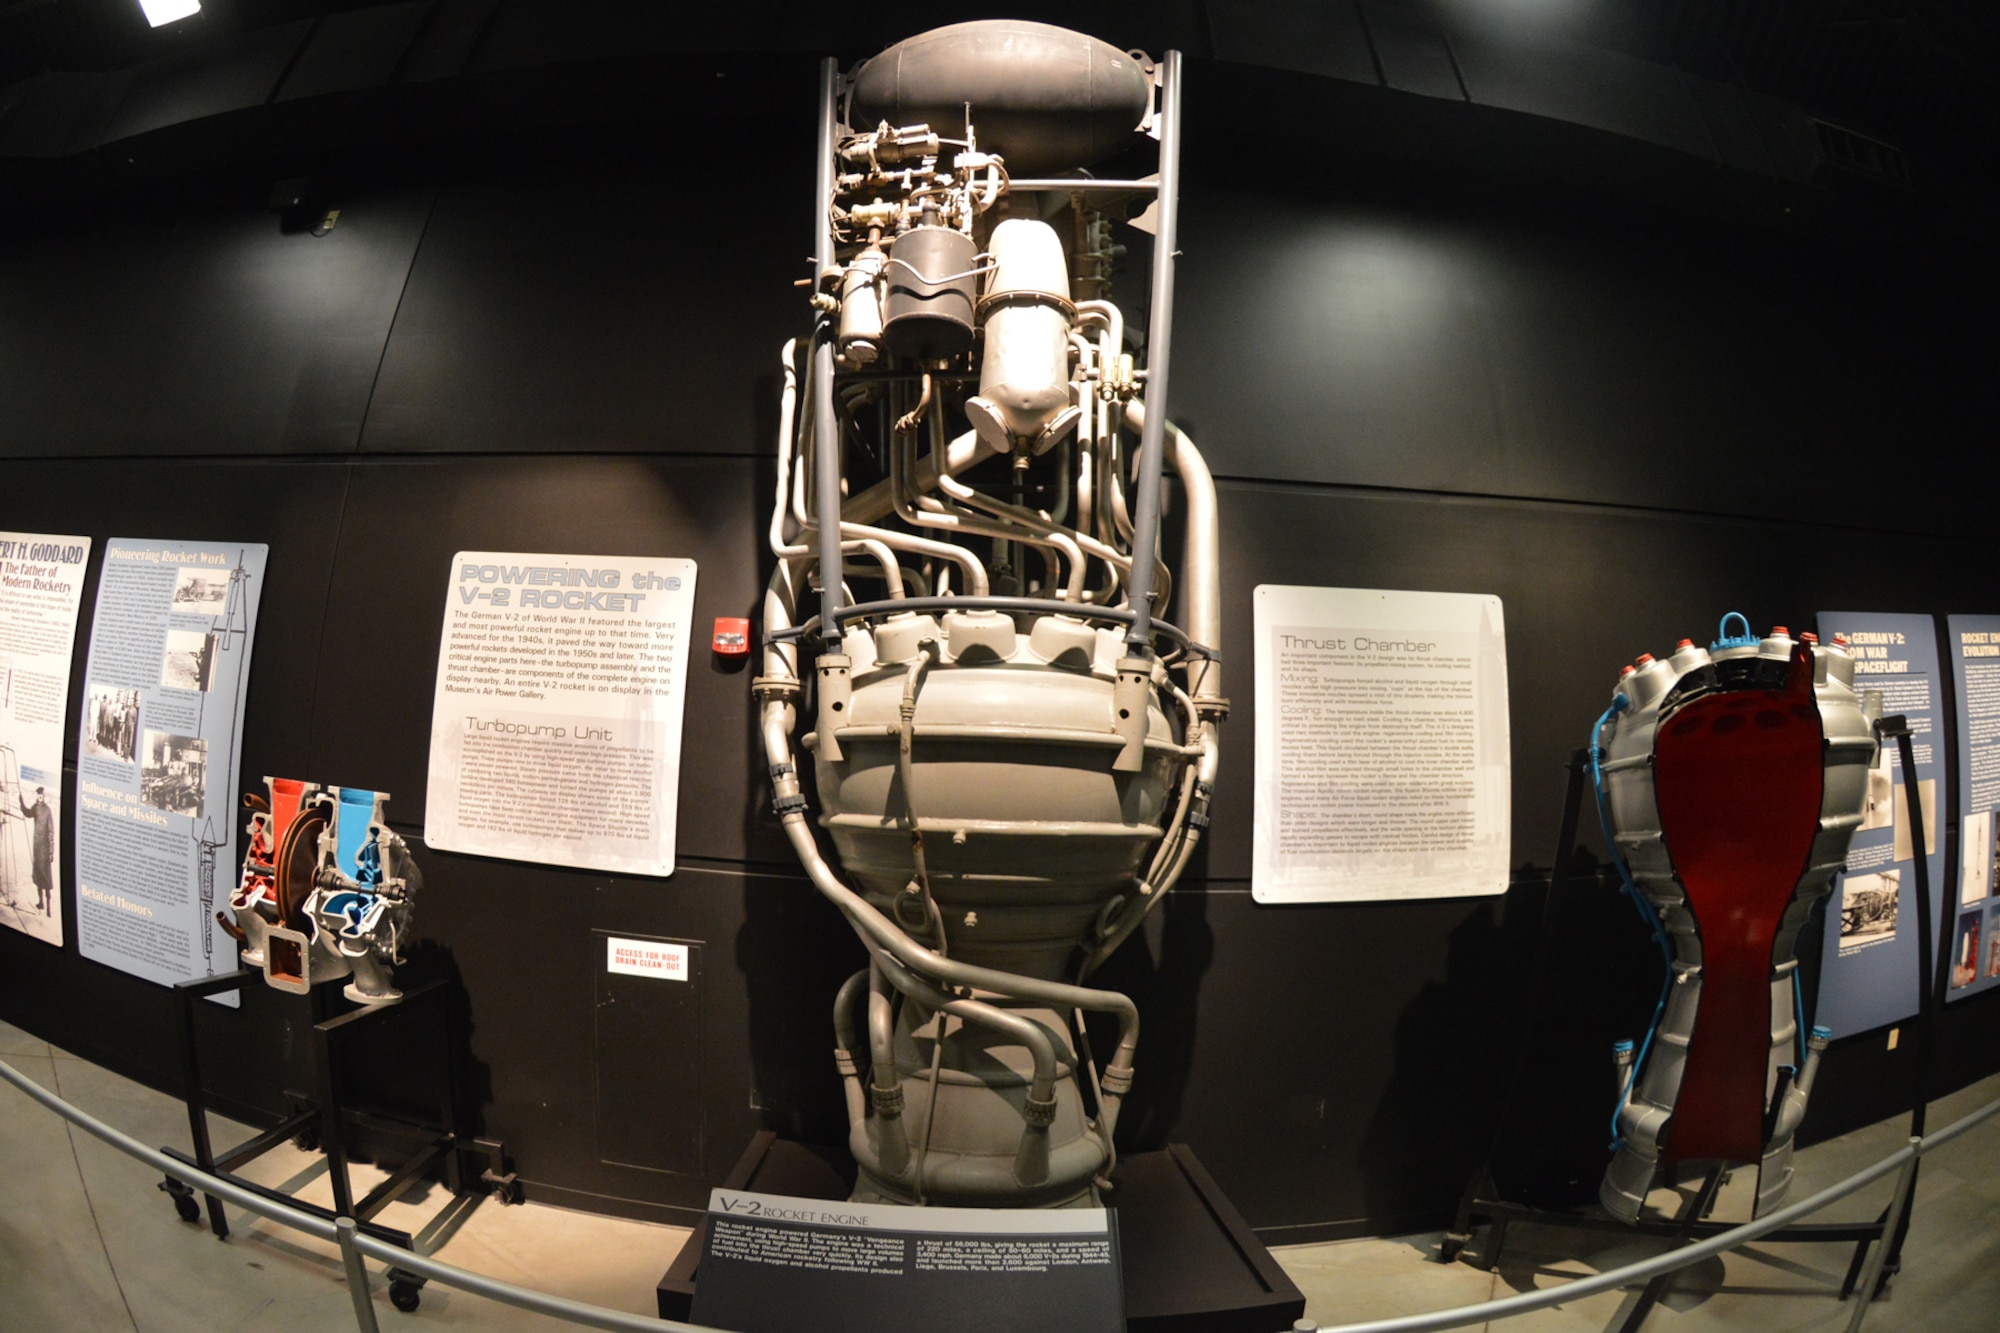 DAYTON, Ohio -- V-2 rocket engine in the Missile and Space Gallery at the National Museum of the United States Air Force. (U.S. Air Force photo)
